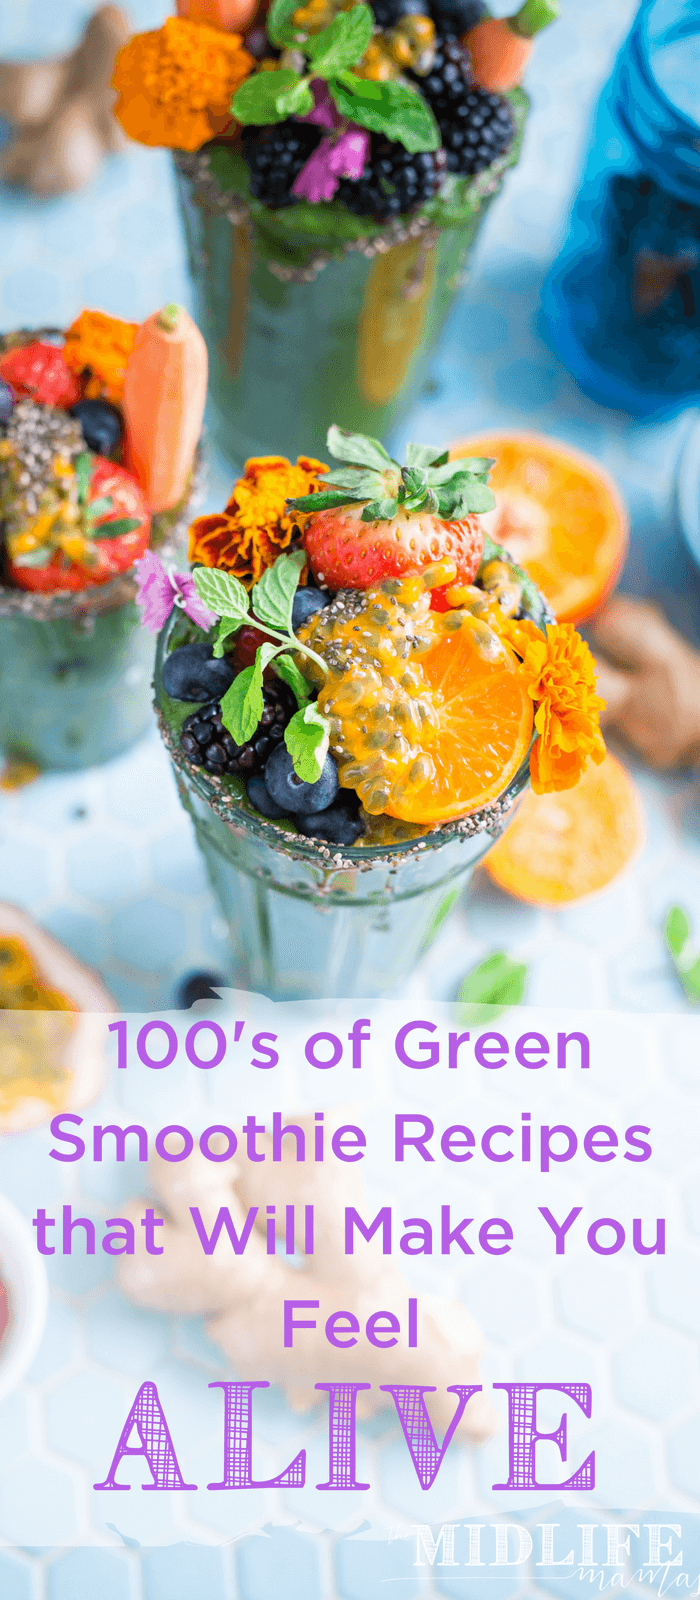 A green energy smoothie is a great part of a healthy day. Right here in one place you will find one million green energy smoothie recipes that you can create all on your own. Crazy, right? www.themidlifemamas.com